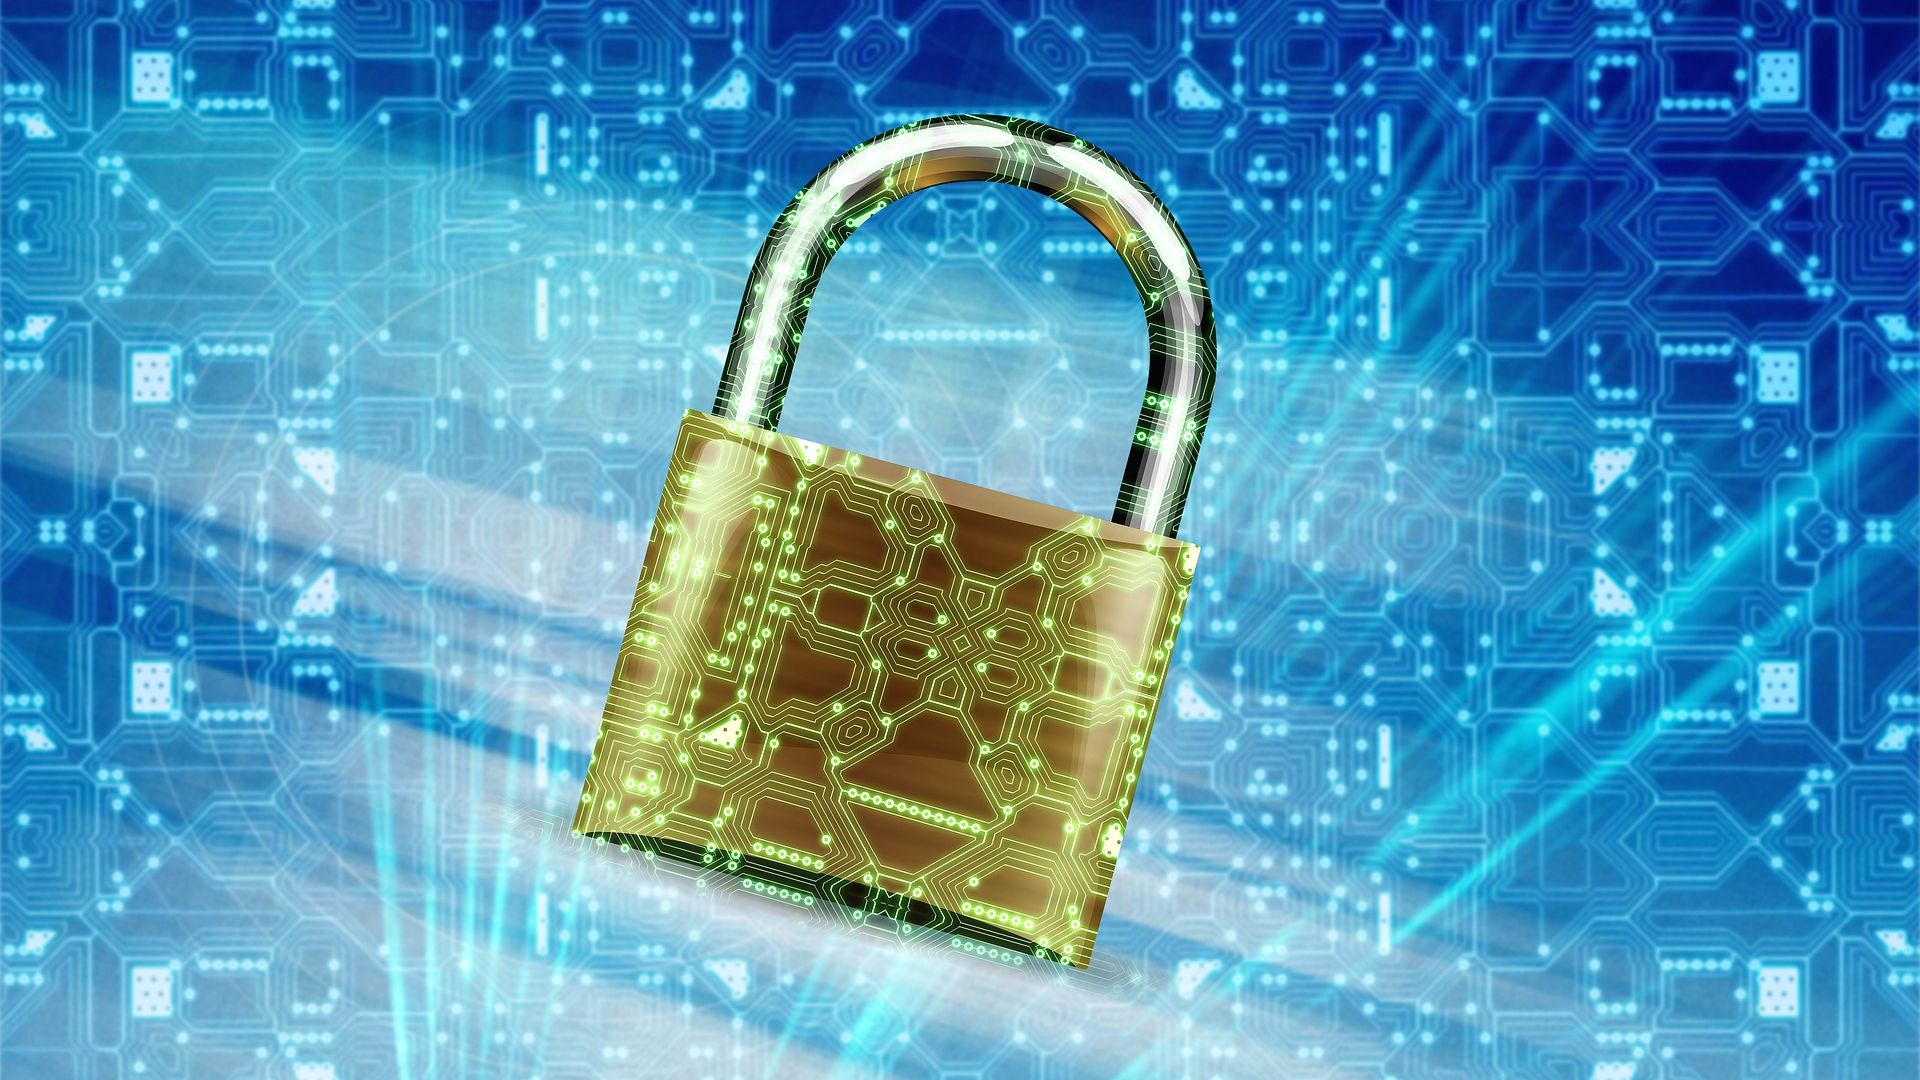 graphic of padlock with circuitry pattern on blue background